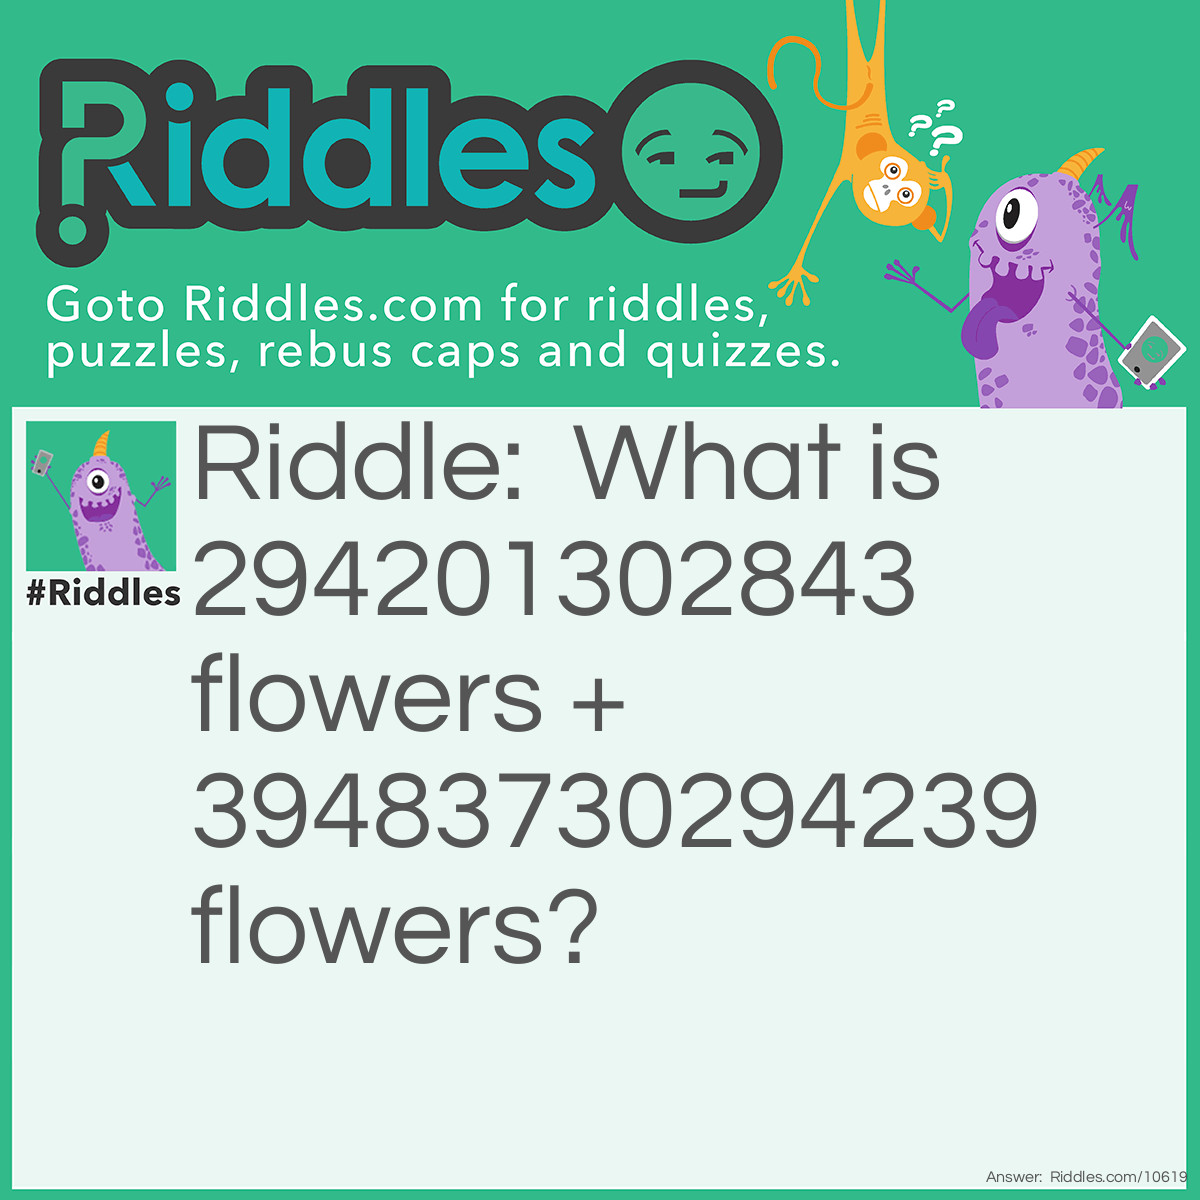 Riddle: What is 294201302843 flowers + 39483730294239 flowers? Answer: A giant garden!